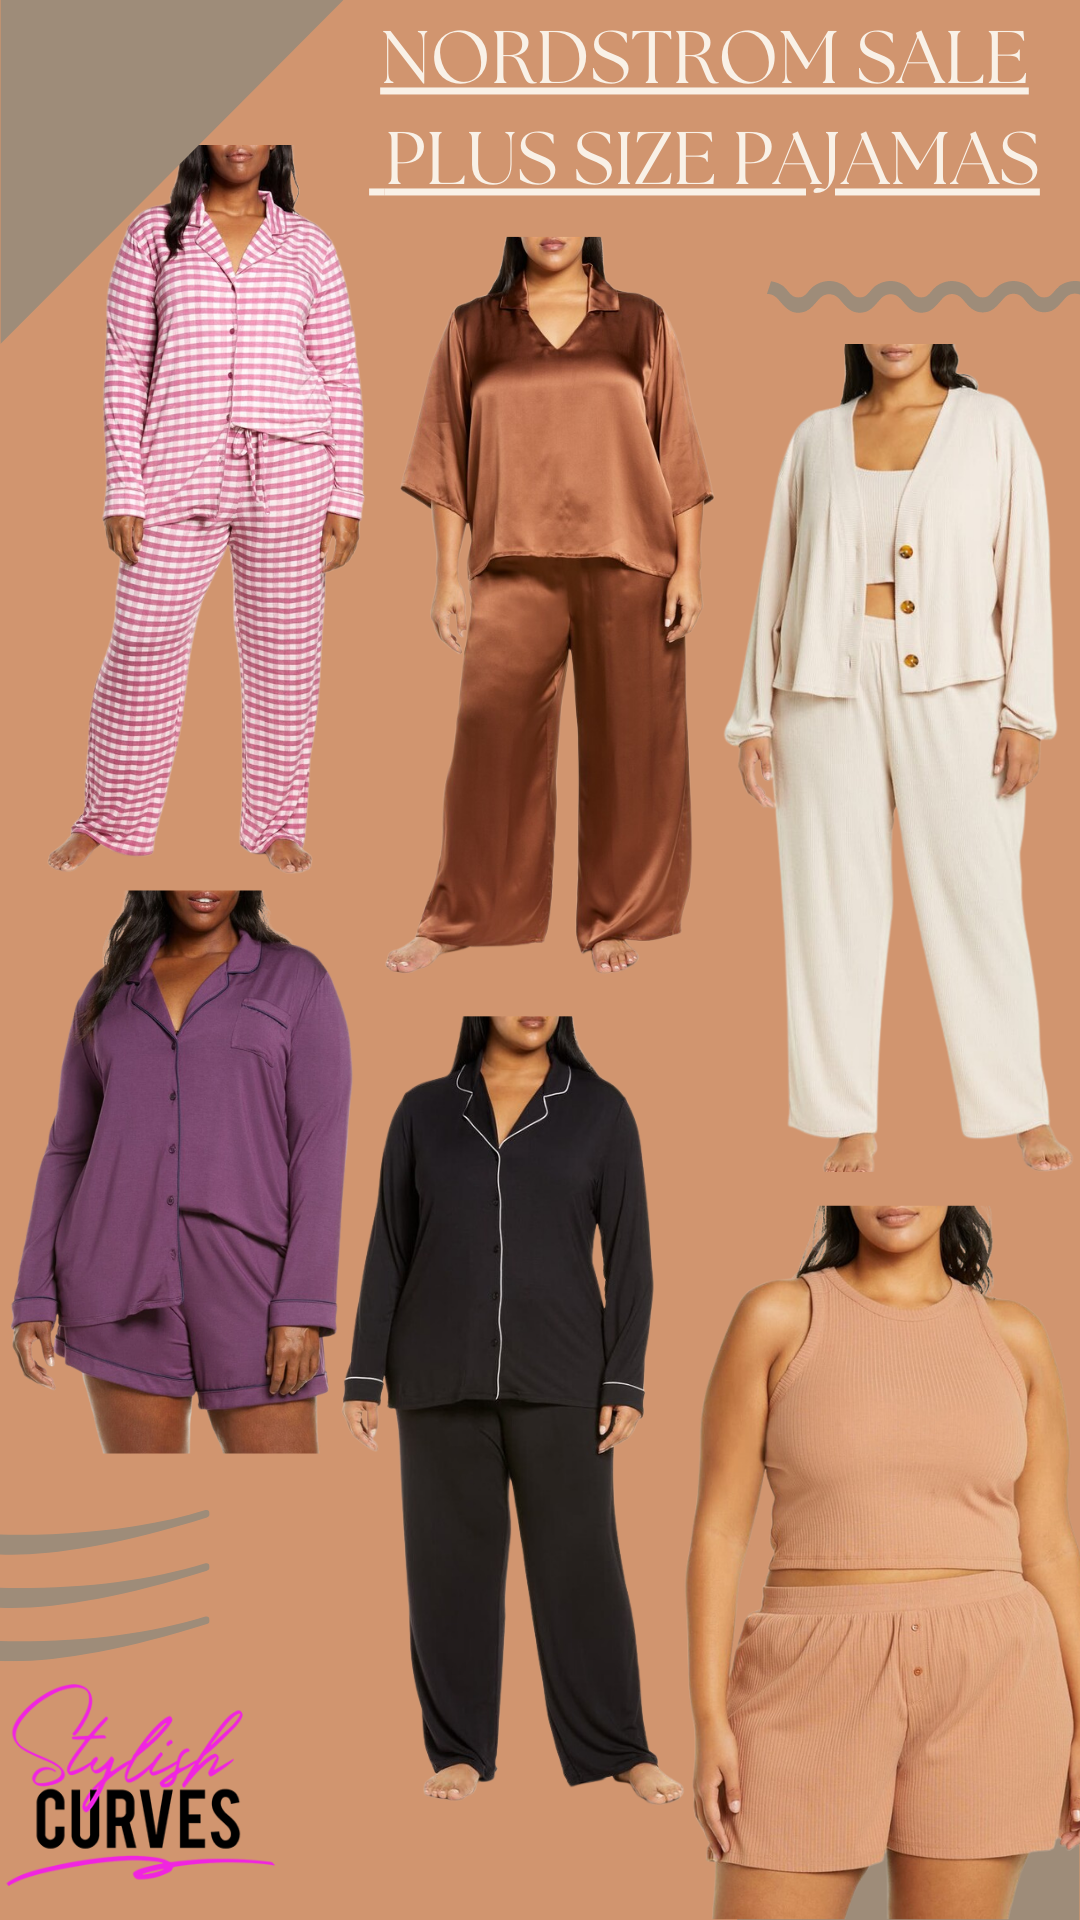 Nordstrom plus size clothing picks from anniversary sale. plus isze pajamas